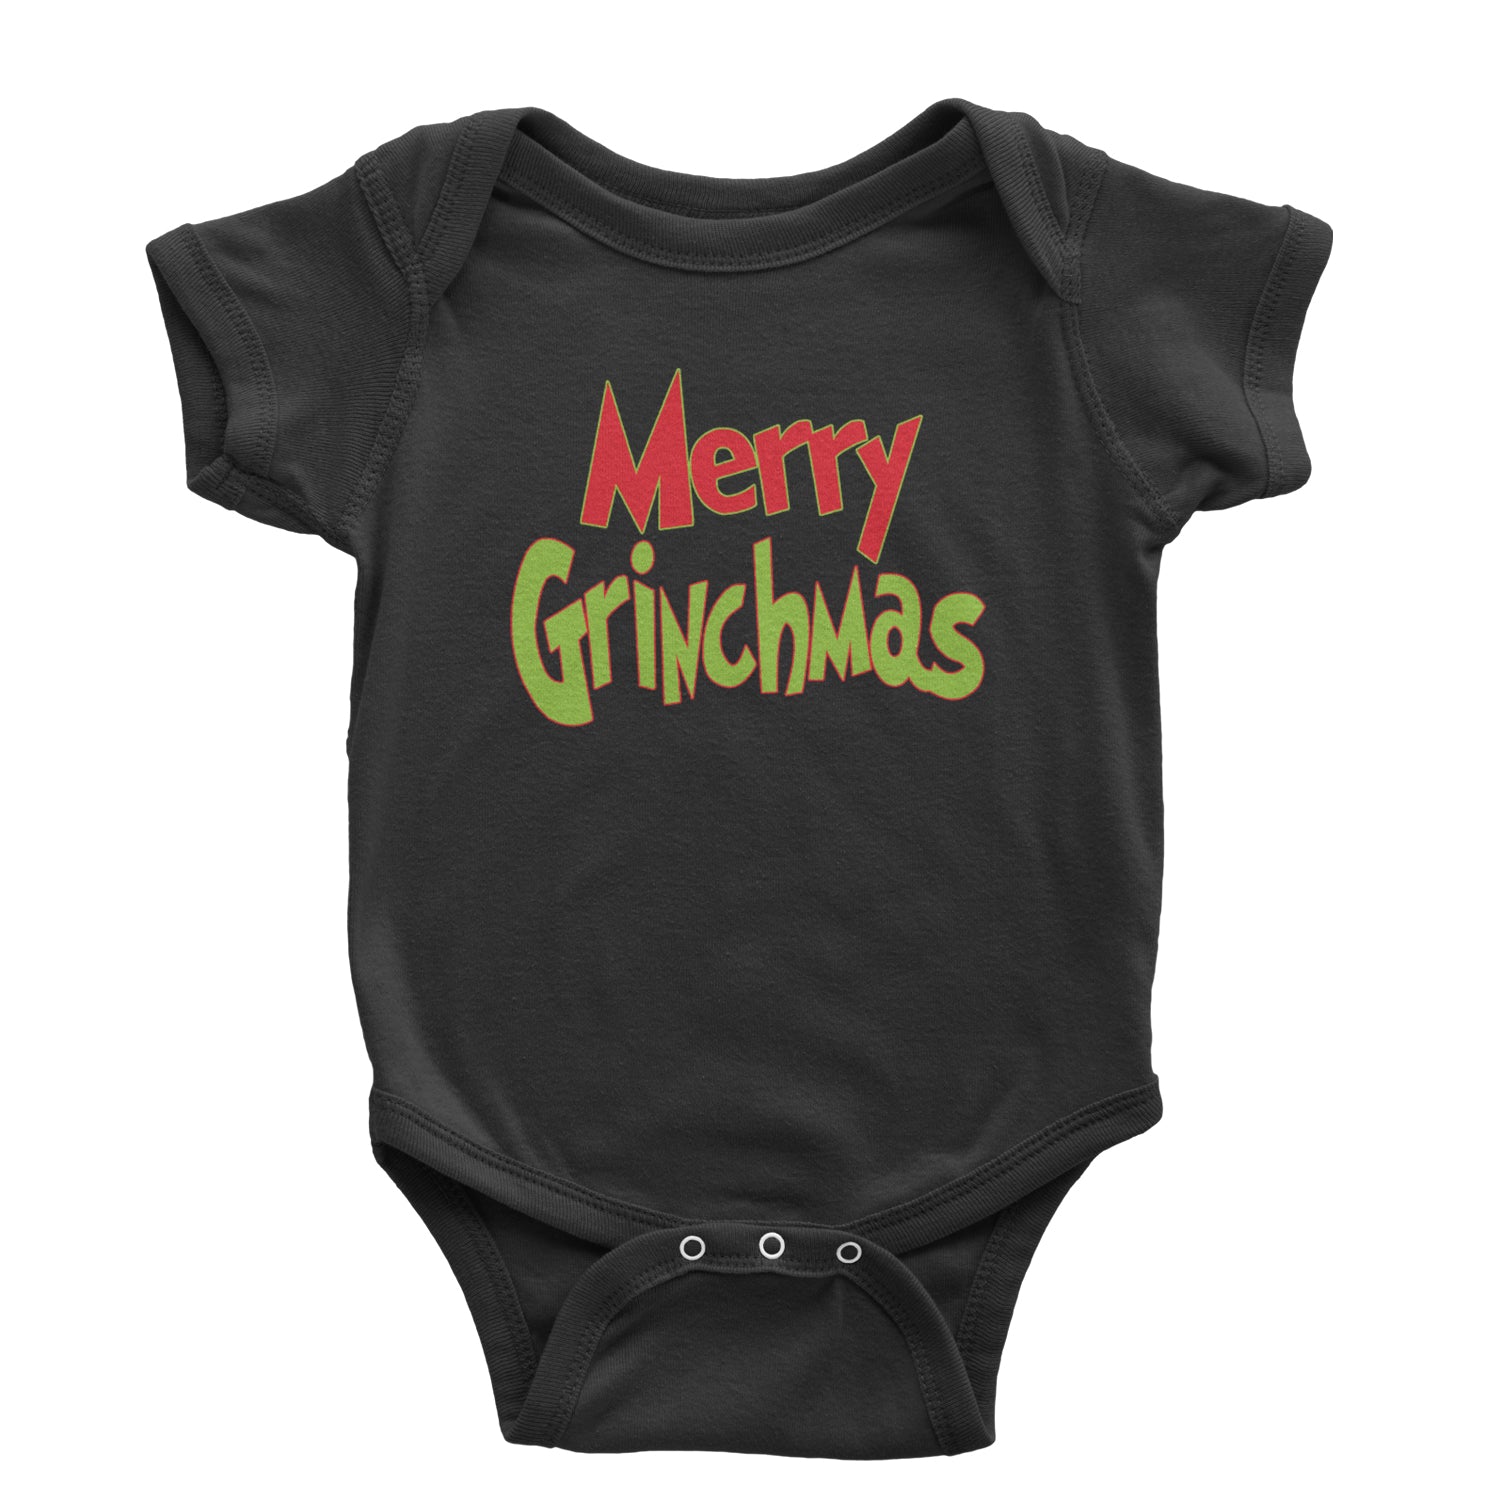 Merry Grinchmas Jolly Merry Christmas Infant One-Piece Romper Bodysuit and Toddler T-shirt